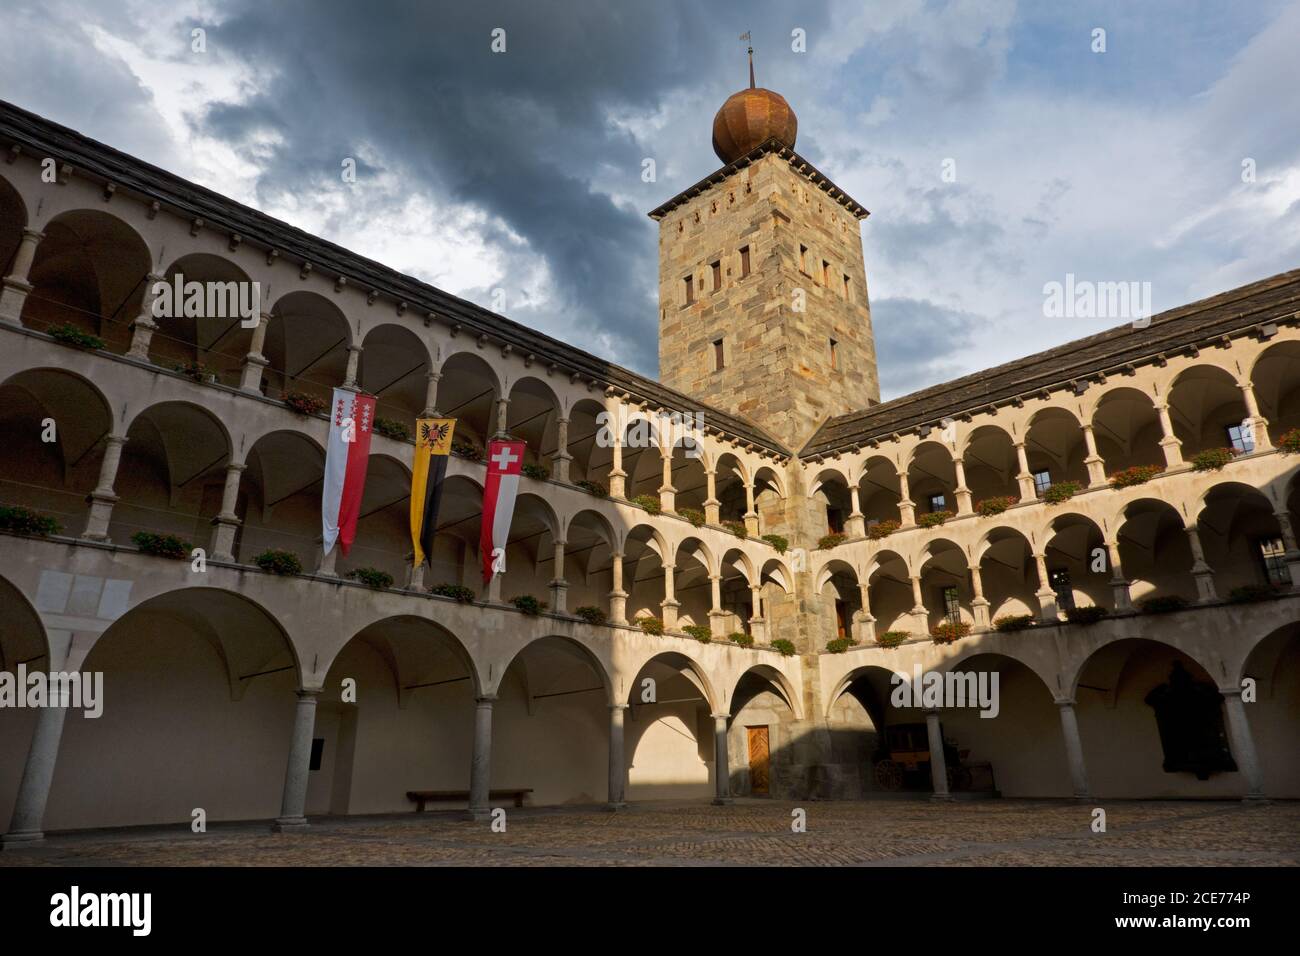 Banners hanging from the balusters of the Stockalper Palace in Brig, Switzerland Stock Photo